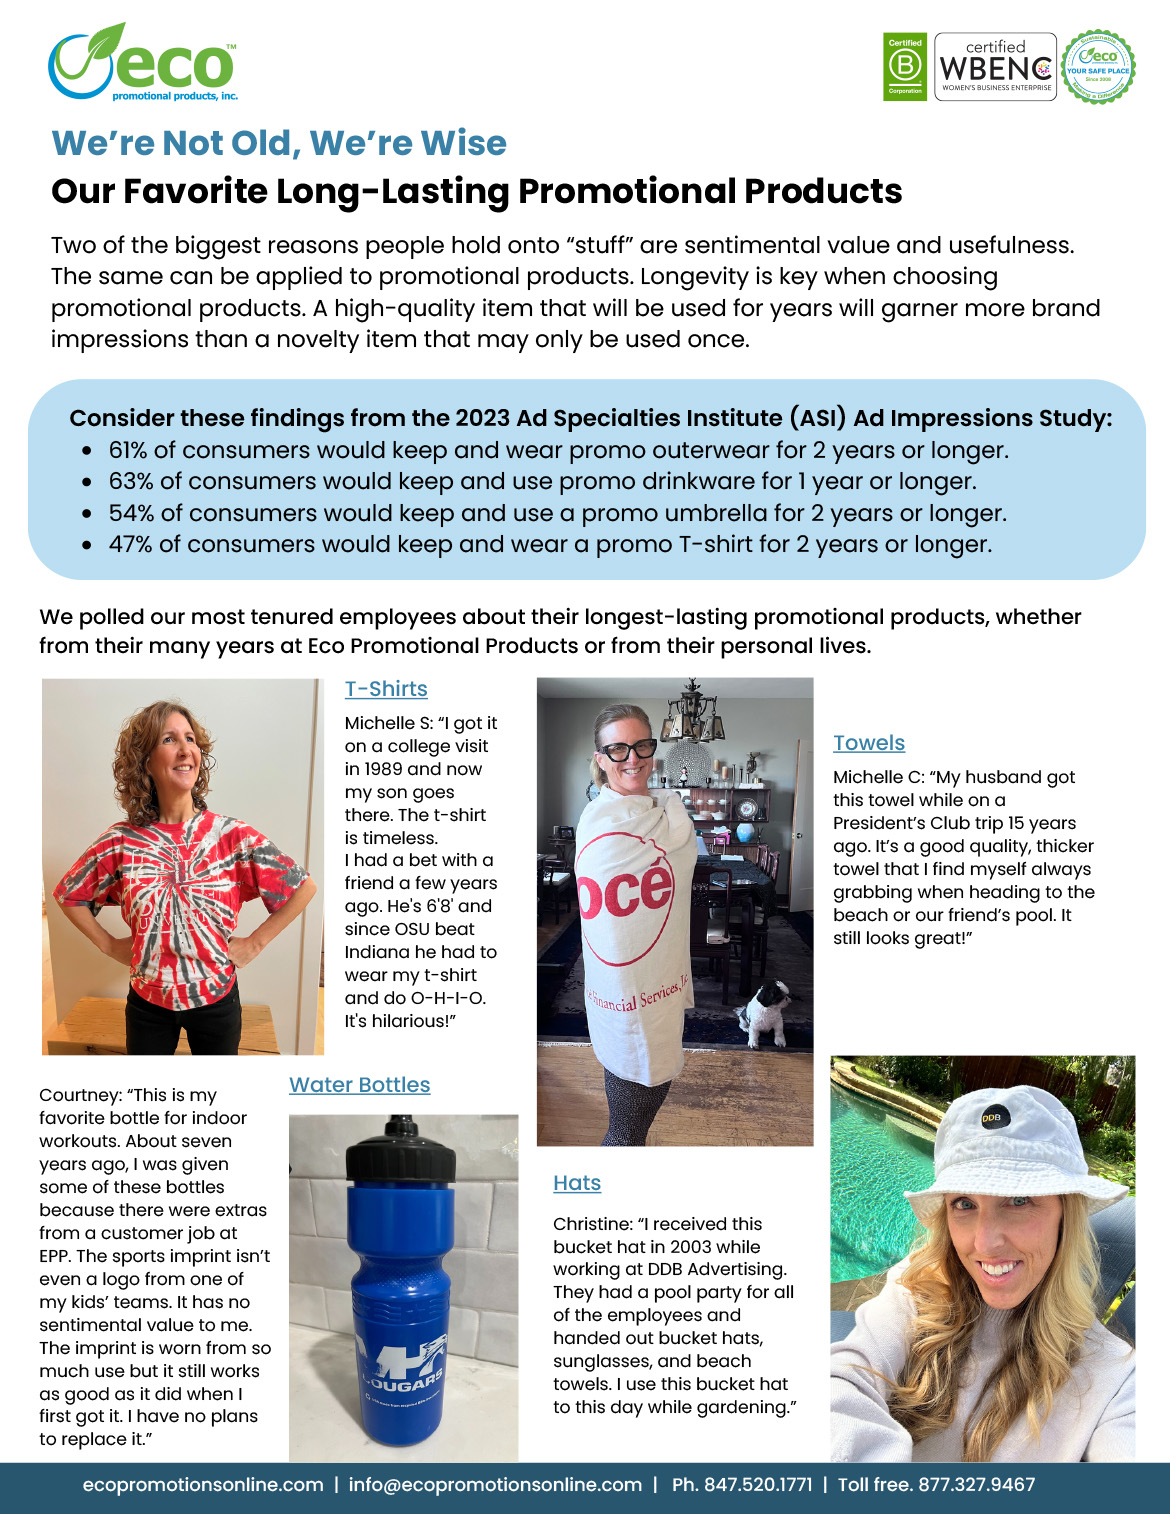 EPP staff Long-Lasting Promotional Products Favorites